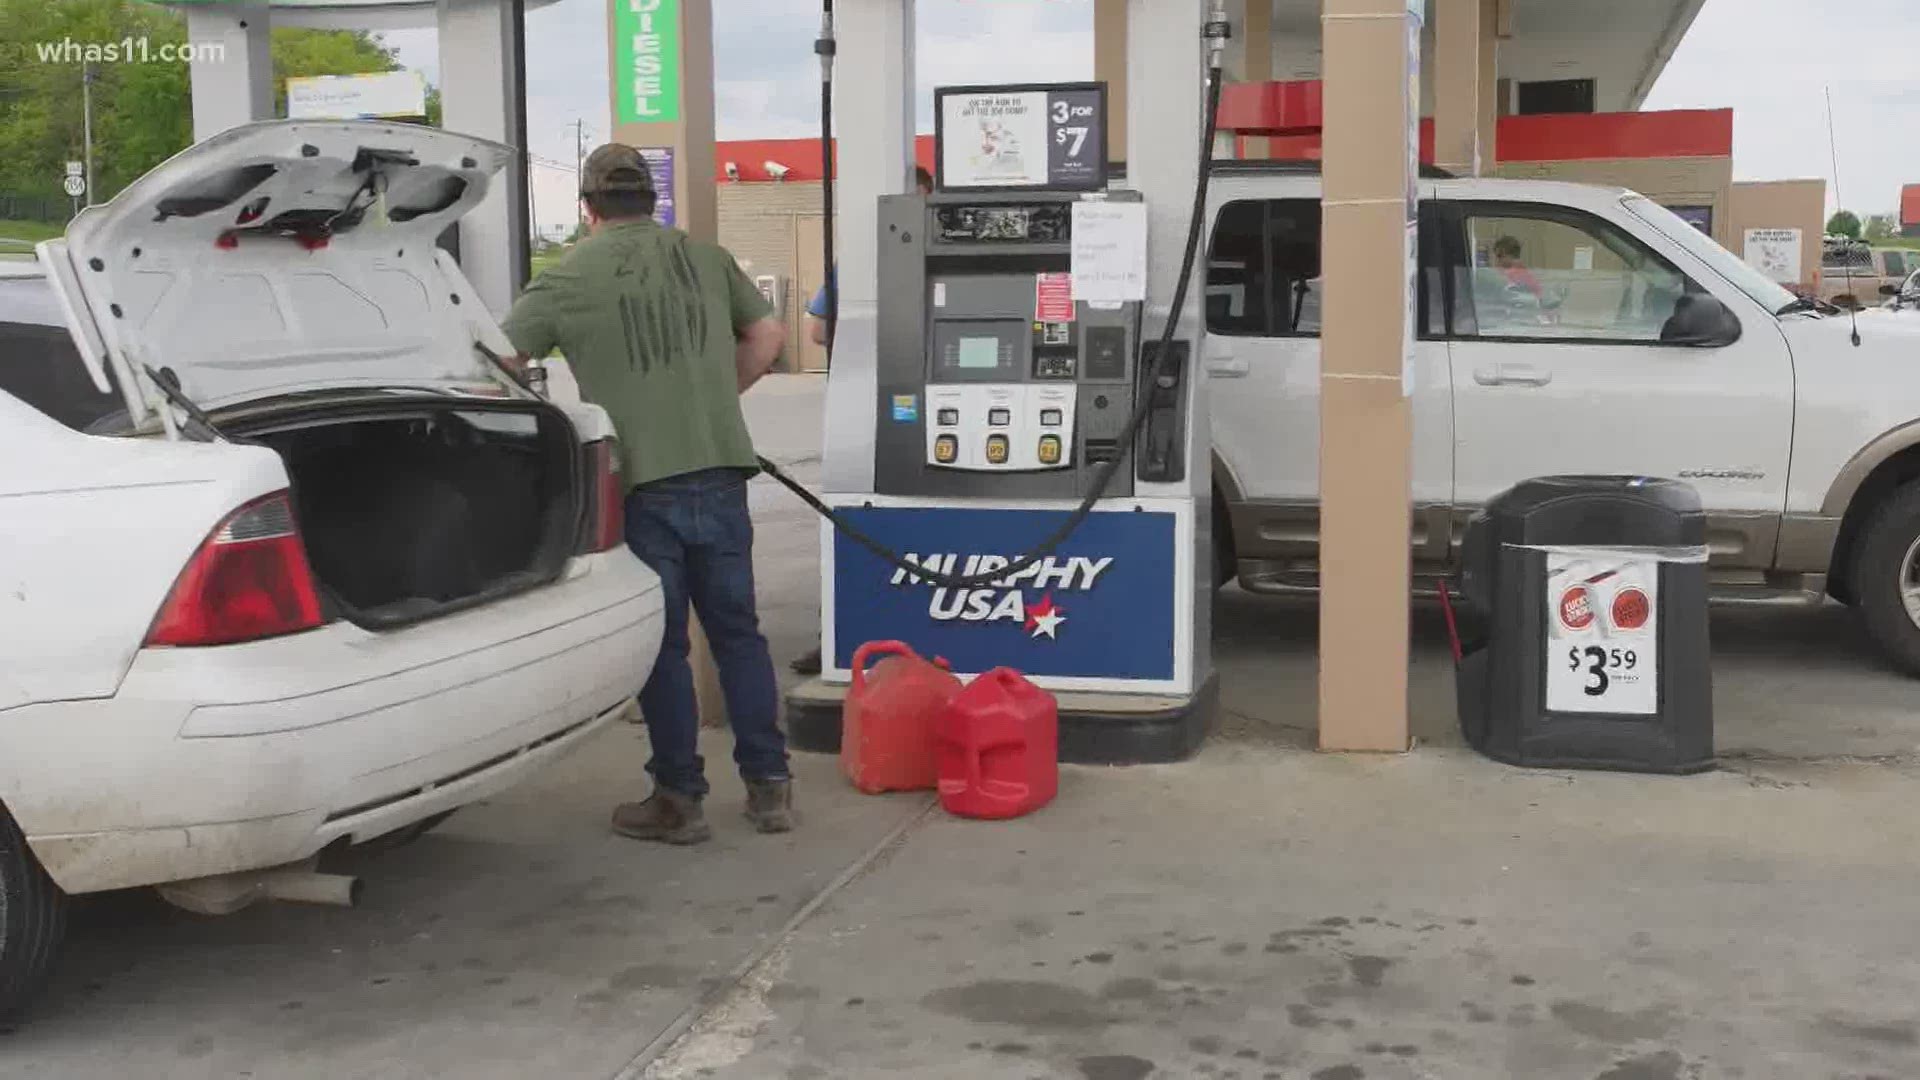 Some stations are already running dry of gas as people tried to fill up their tanks due to the pipeline shutdown.